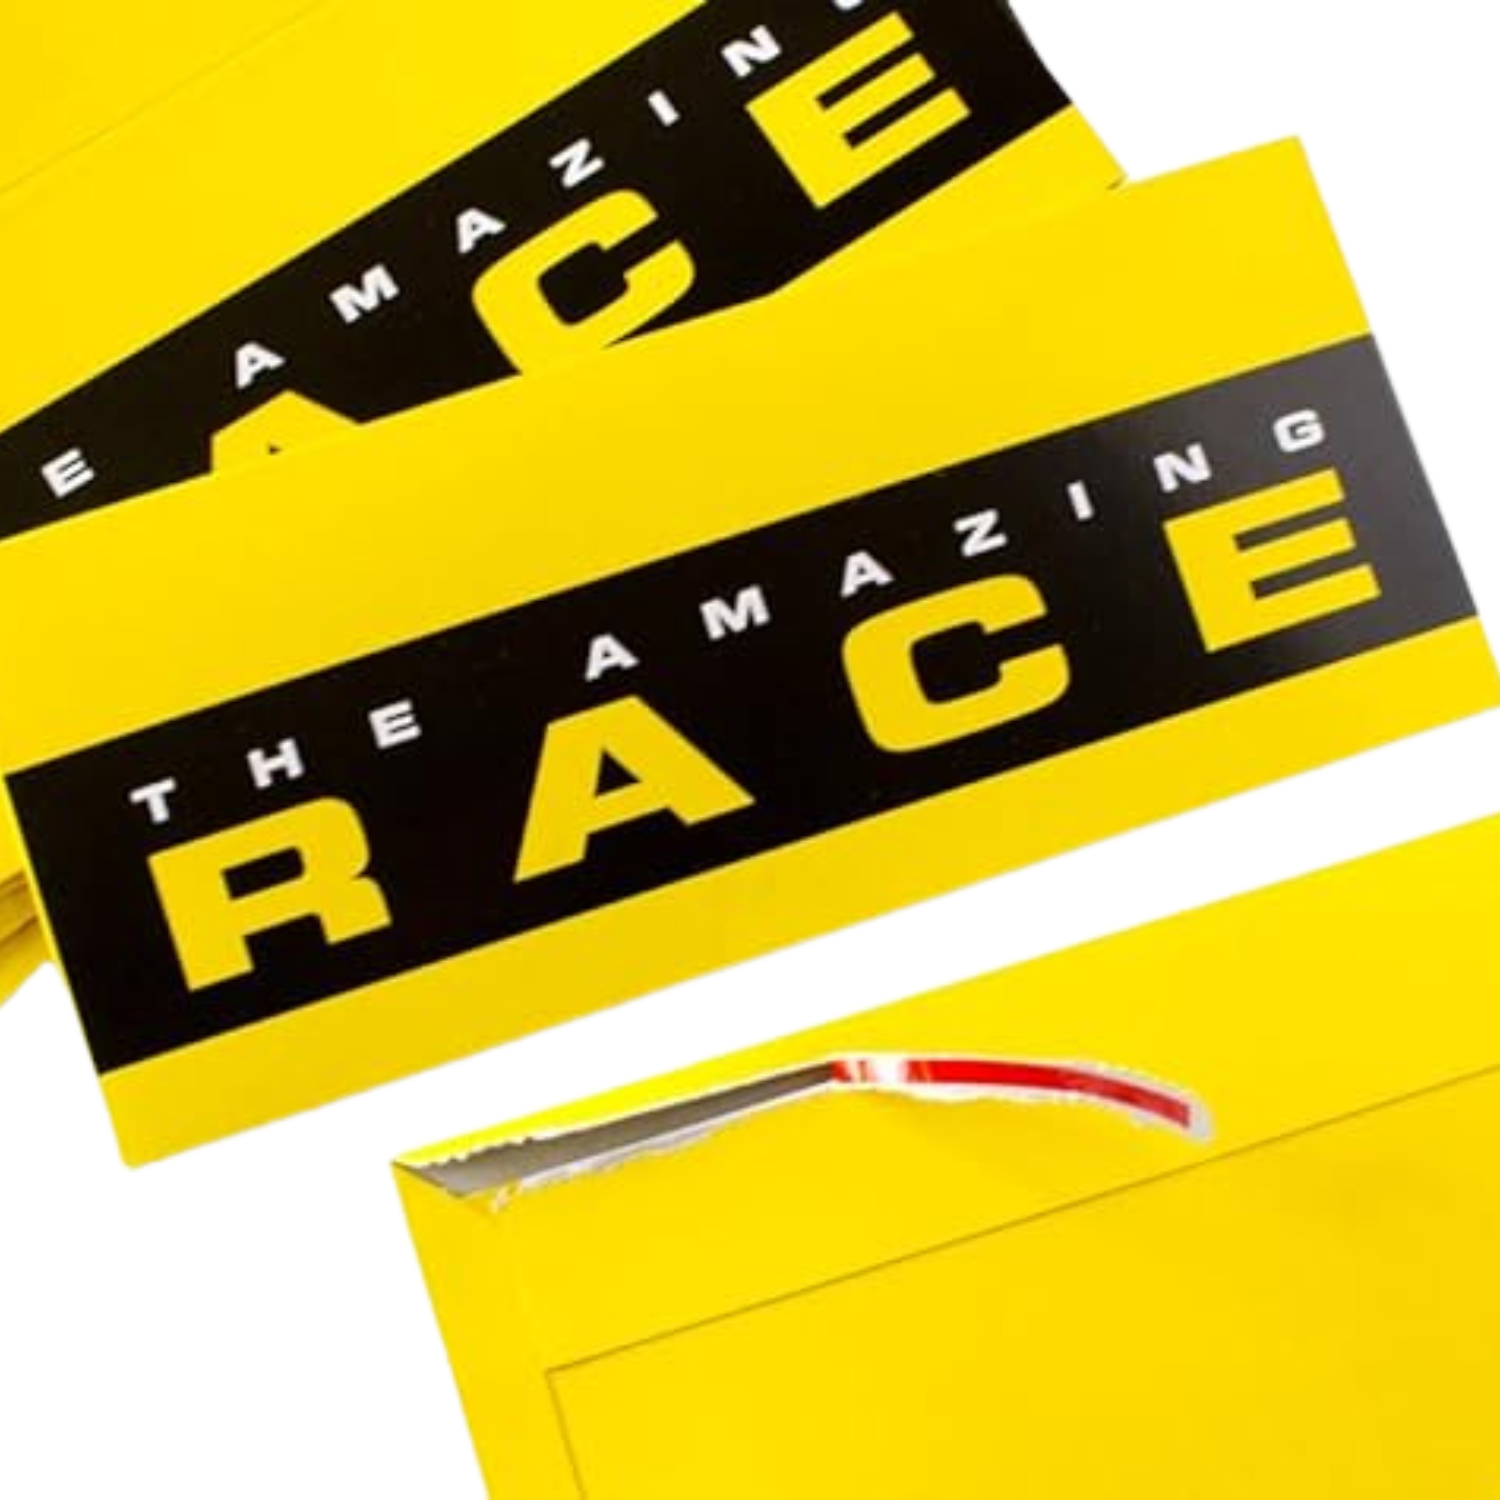 This images shows three envelopes used on the Amazing Race, one of which is being opened.